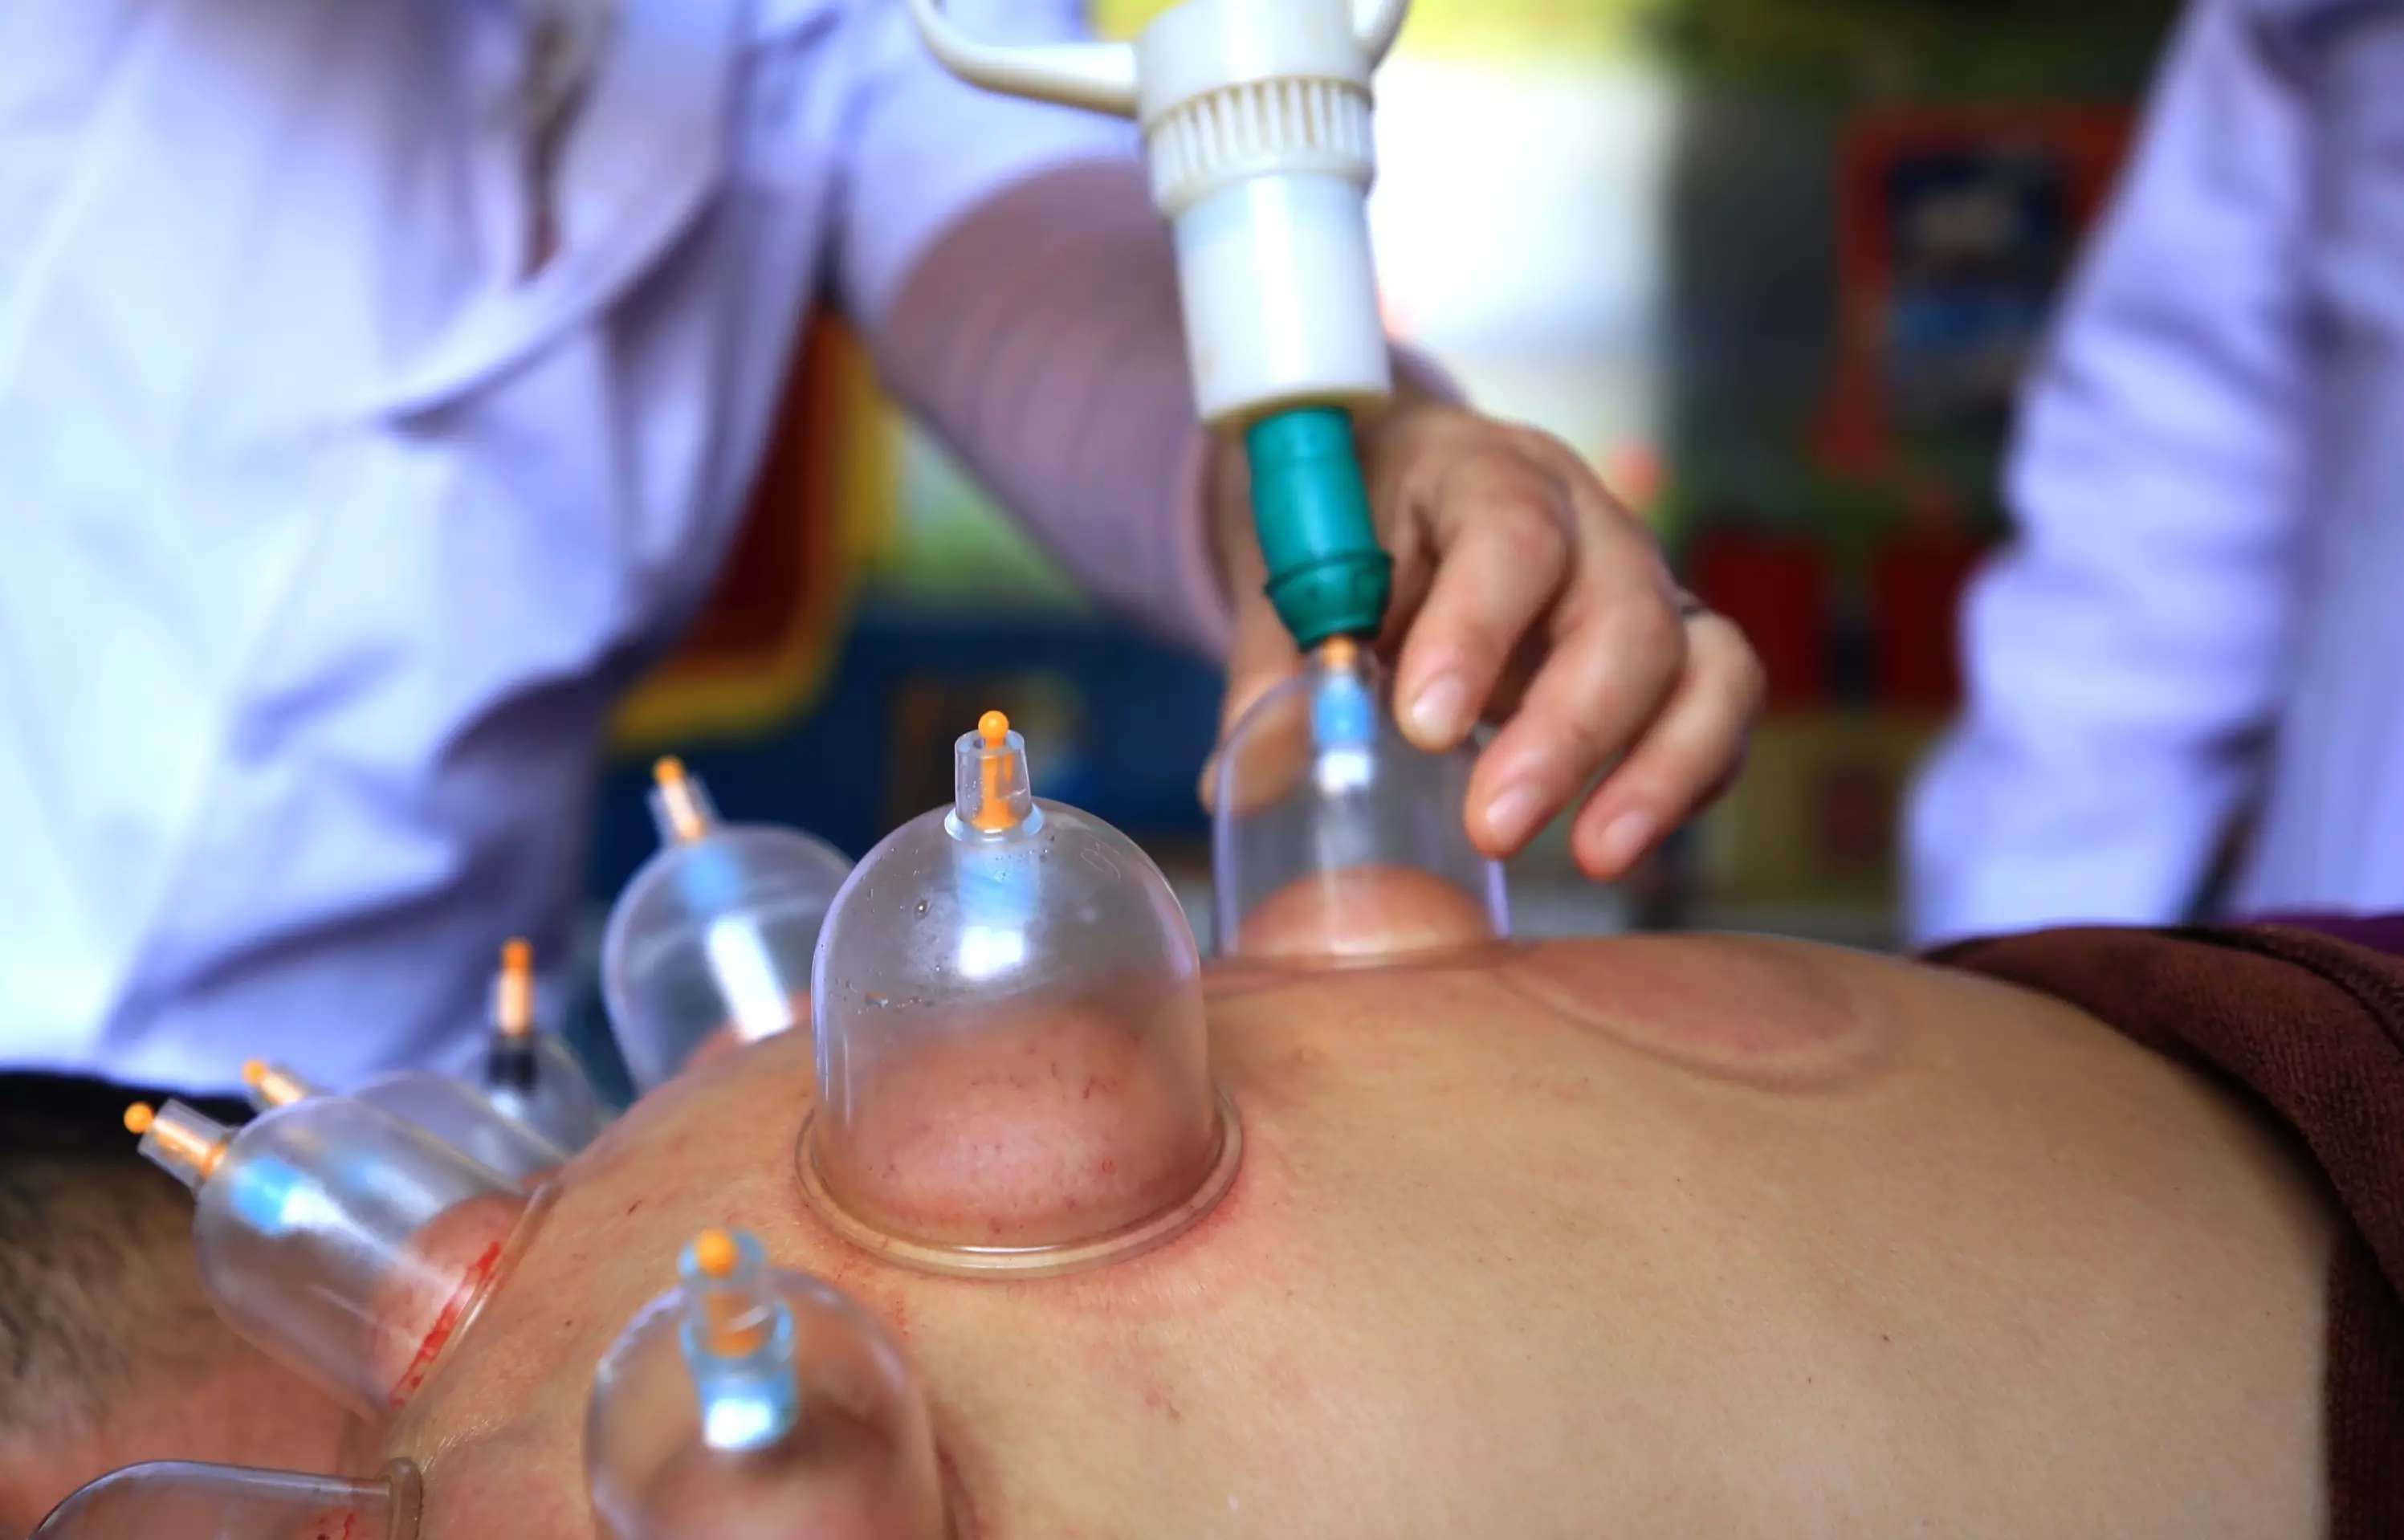 Cupping is an ancient Chinese alternative therapy used to relieve pain and improve circulation. (